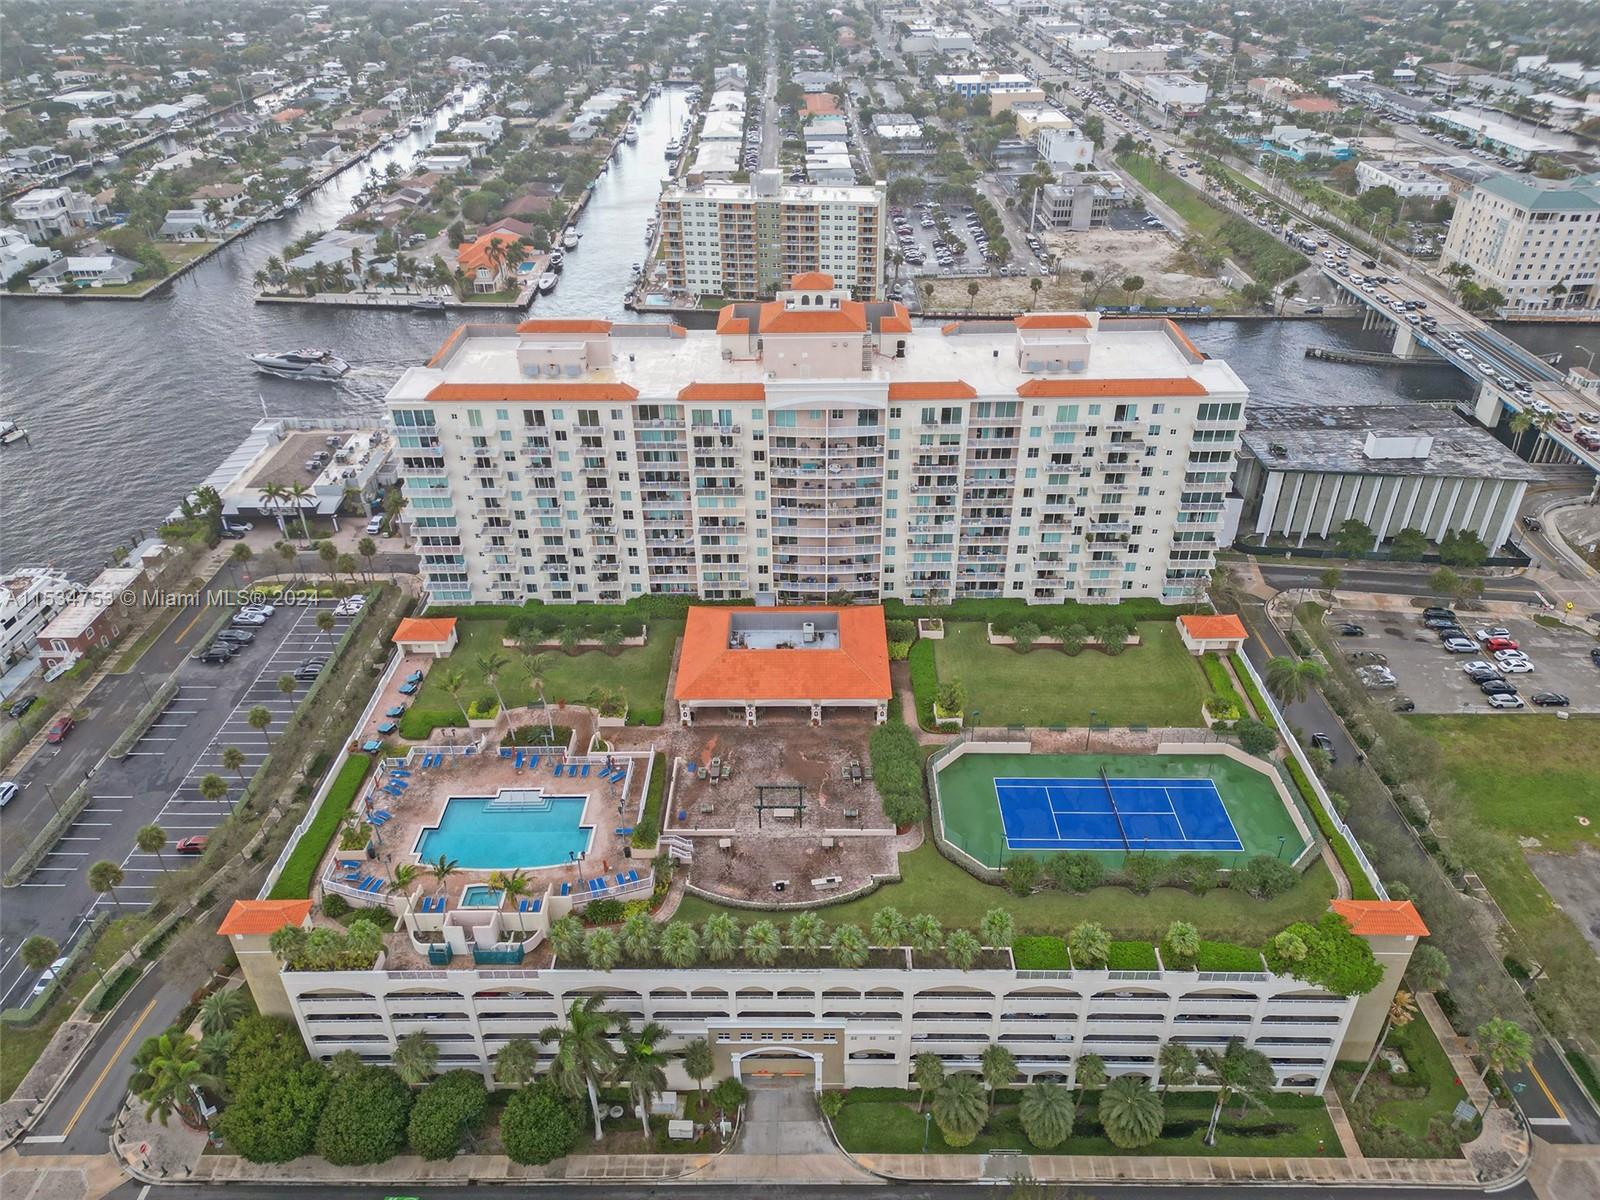 an aerial view of swimming pool and yard